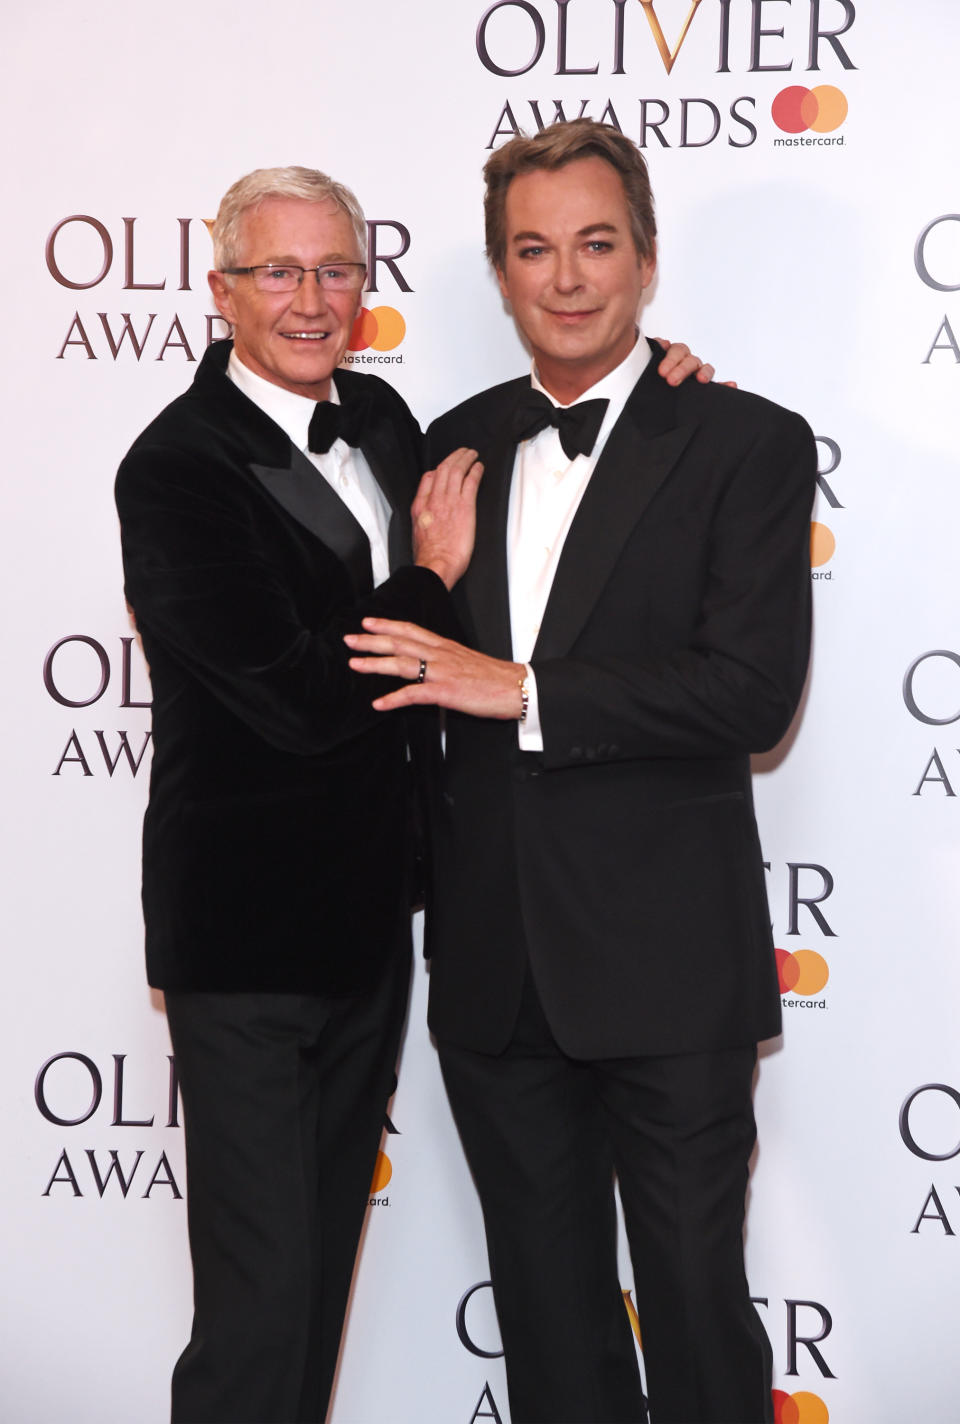 LONDON, ENGLAND - APRIL 09:  Paul O'Grady (L) and Julian Clary pose in the winners room at The Olivier Awards 2017 at Royal Albert Hall on April 9, 2017 in London, England.  (Photo by David M. Benett/Dave Benett/Getty Images)